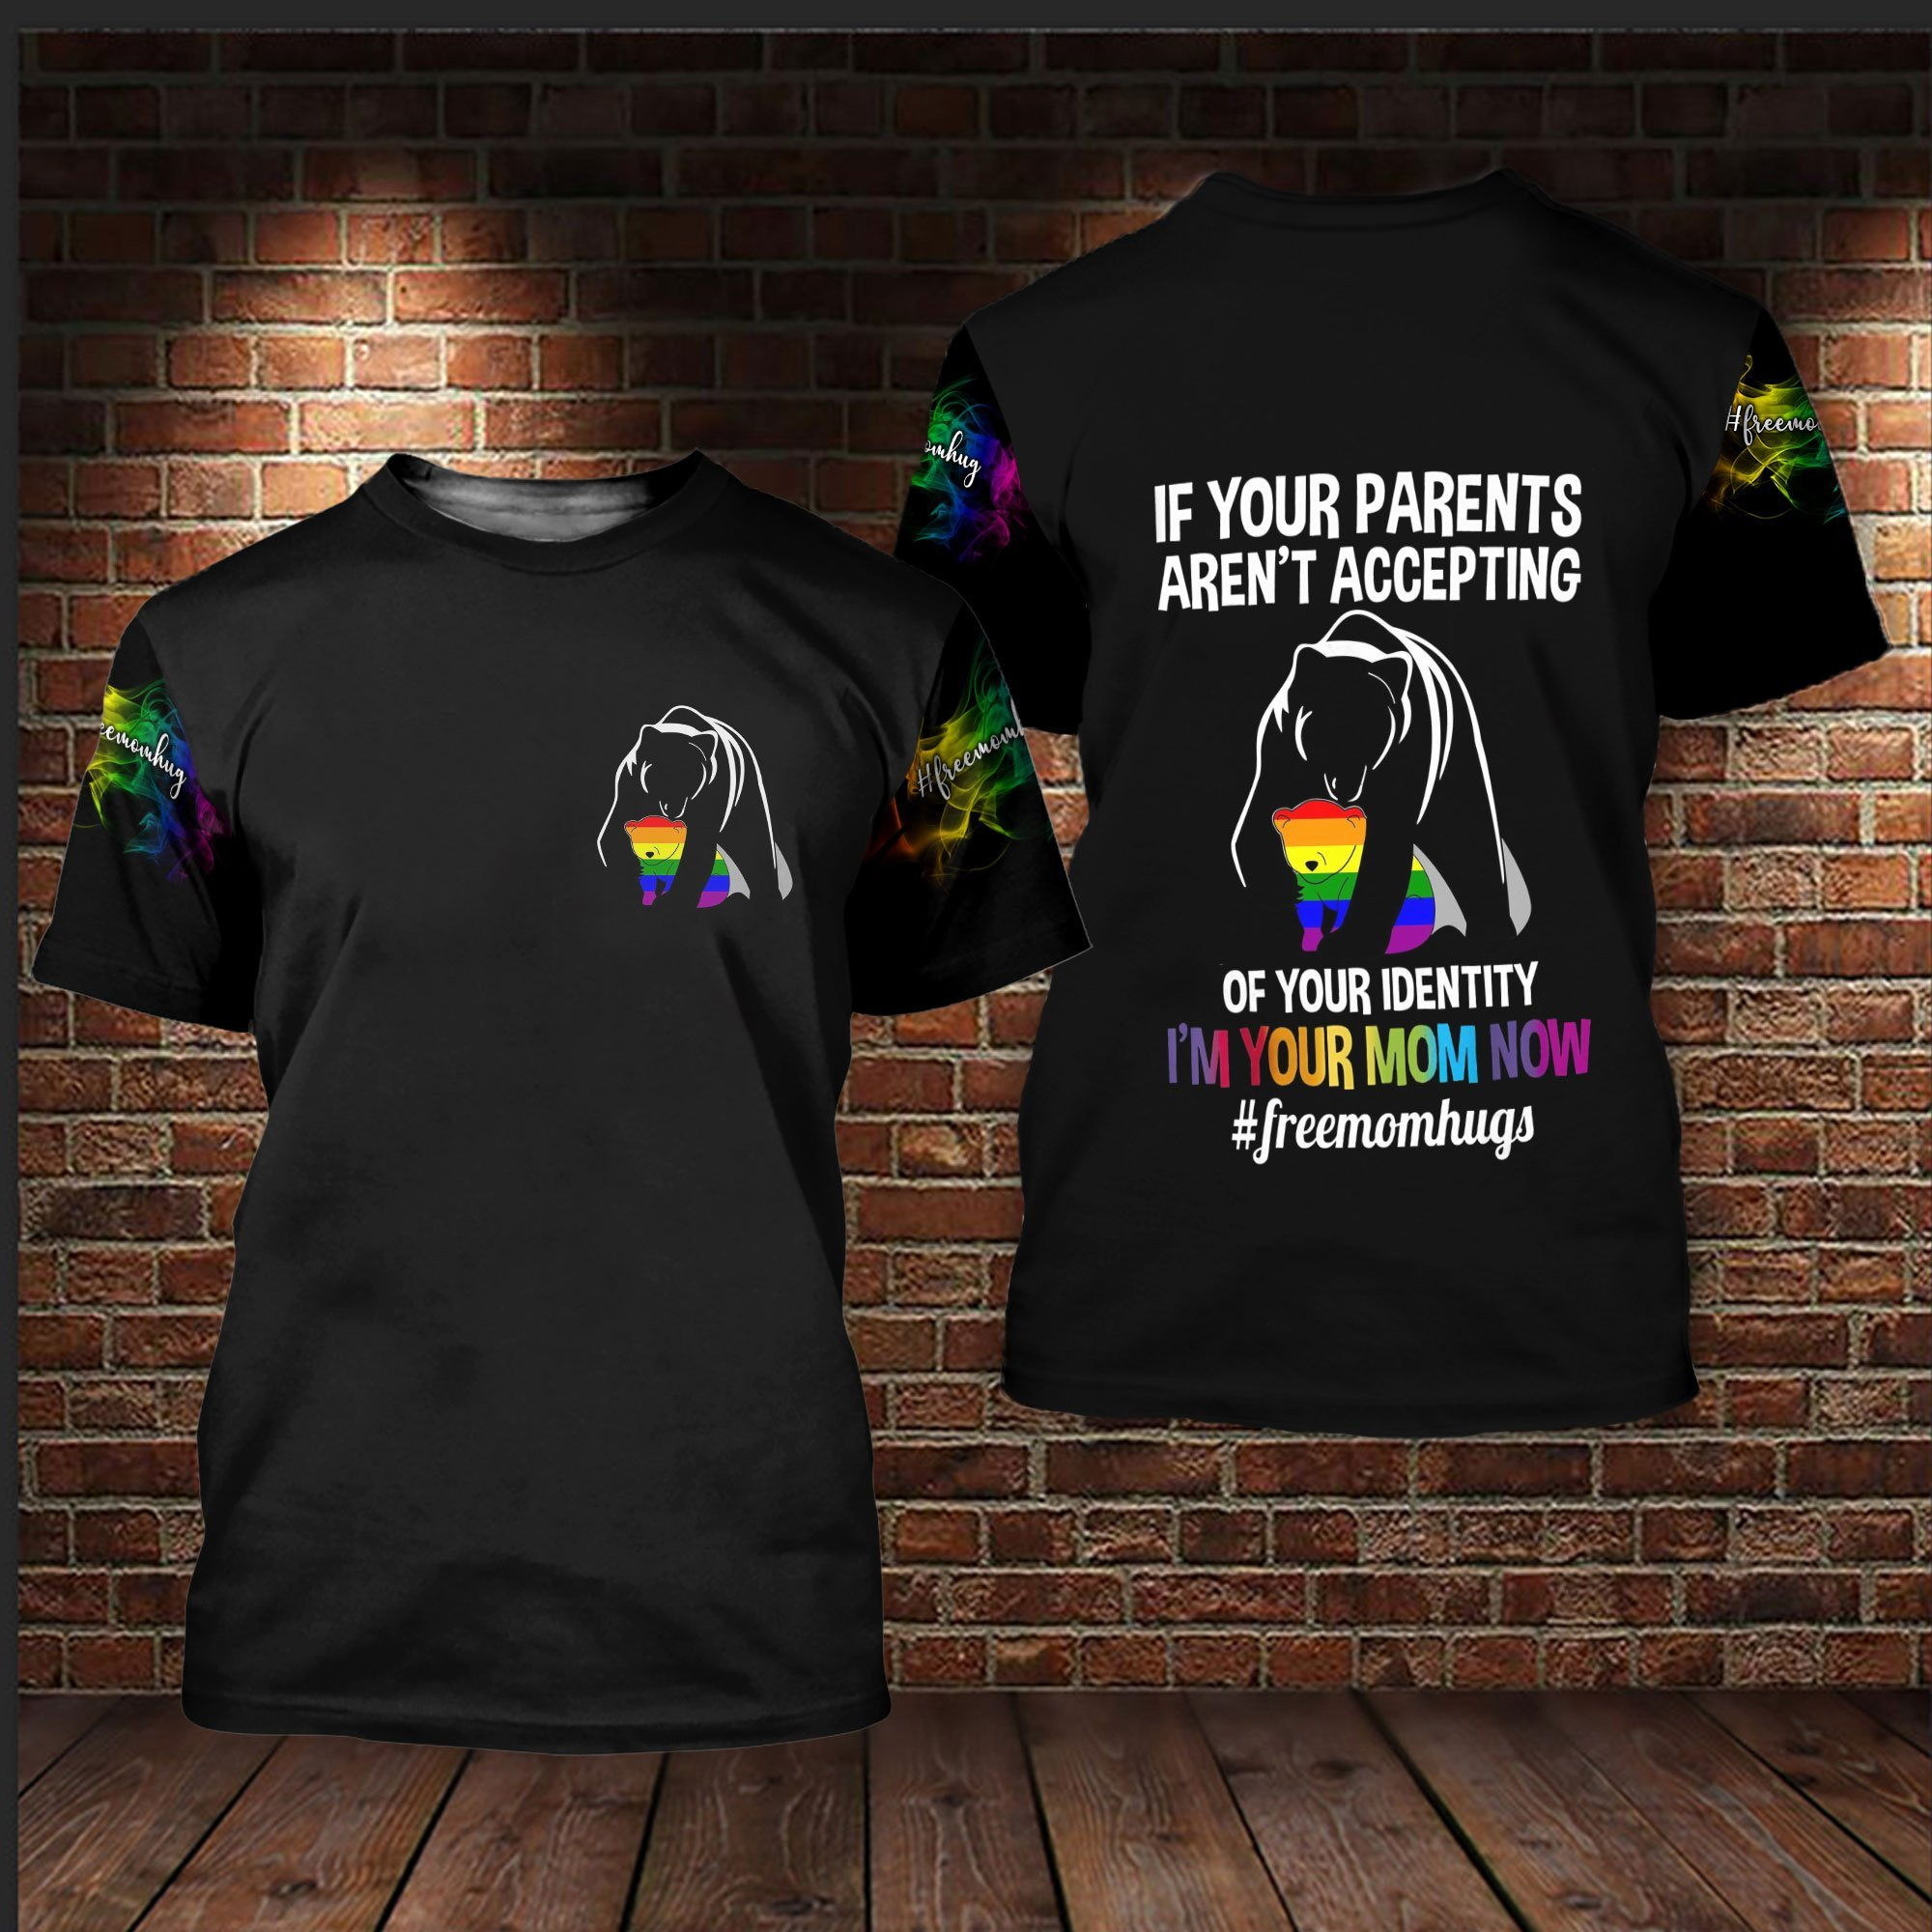 Gift Support To LGBT Community/ If Your Parents Aren’t Accepting You Of Your Identity I’m Your Mom Now